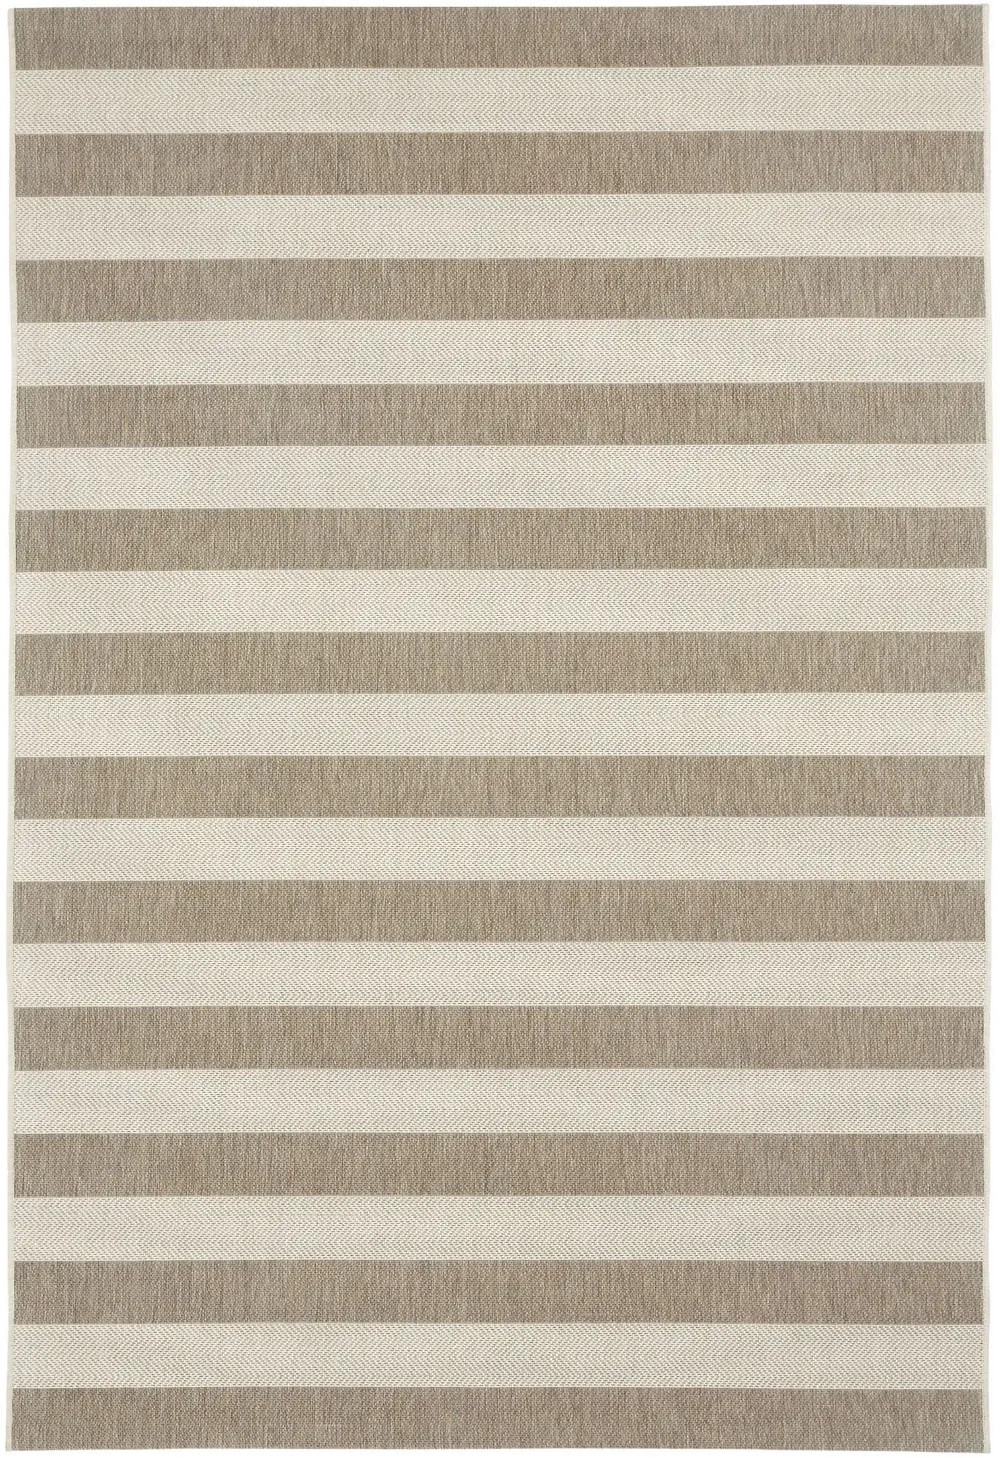 473067535 4 x 6 Small Striped Barley Tan Indoor-Outdoor Rug - Finesse-1